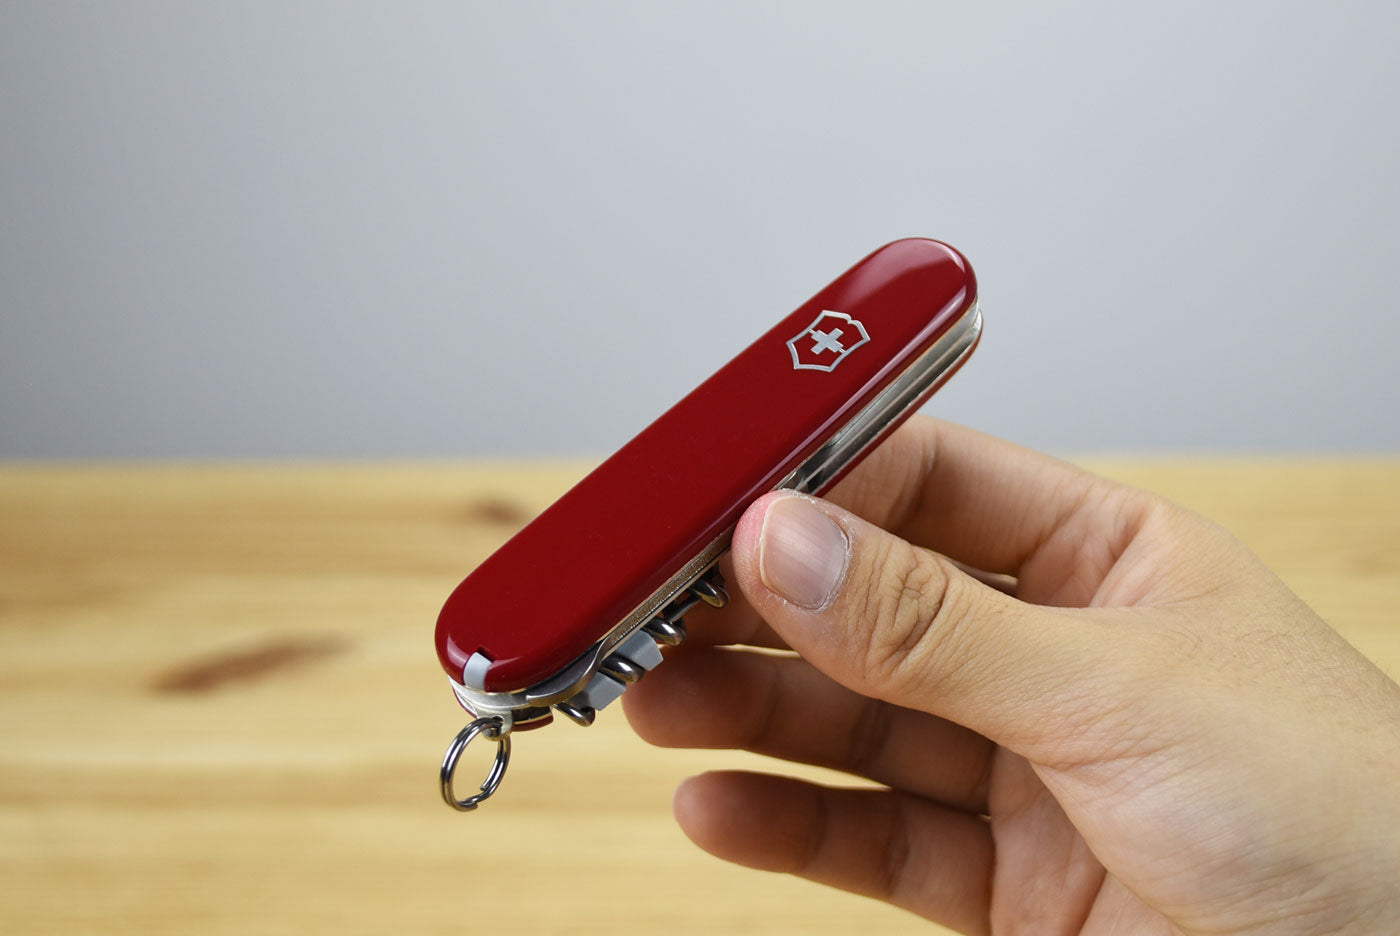 Victorinox Compact in red - 1.3405